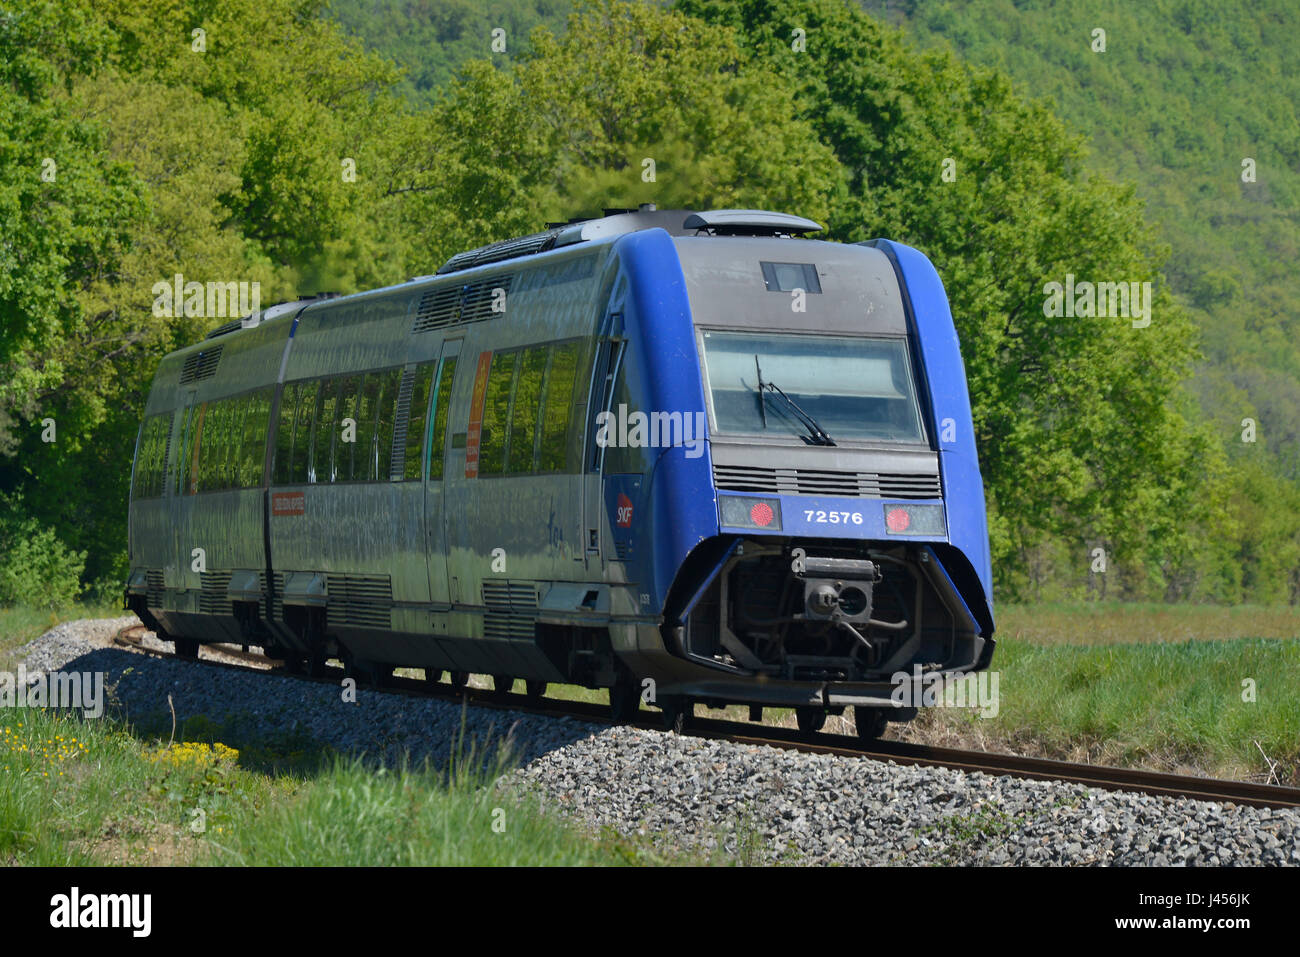 Regional train still wearing the Midi-Pyrenees livery. The region is now called Occitanie. France. Stock Photo